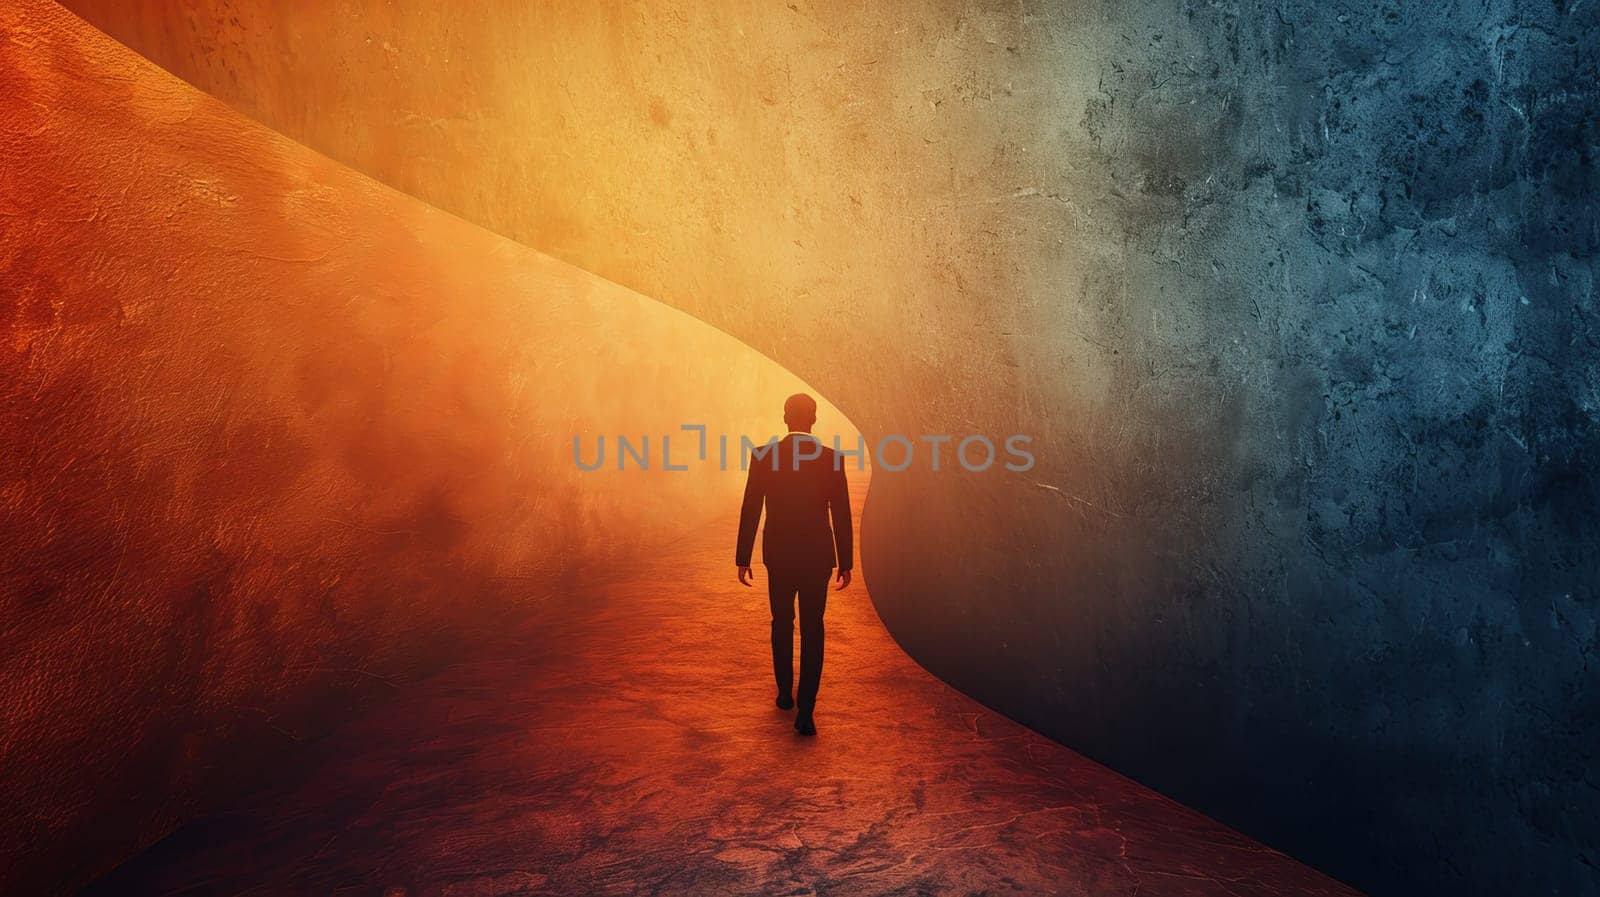 A man walks through a tunnel with a sunset in the background. The tunnel is empty and the man is the only person in the scene